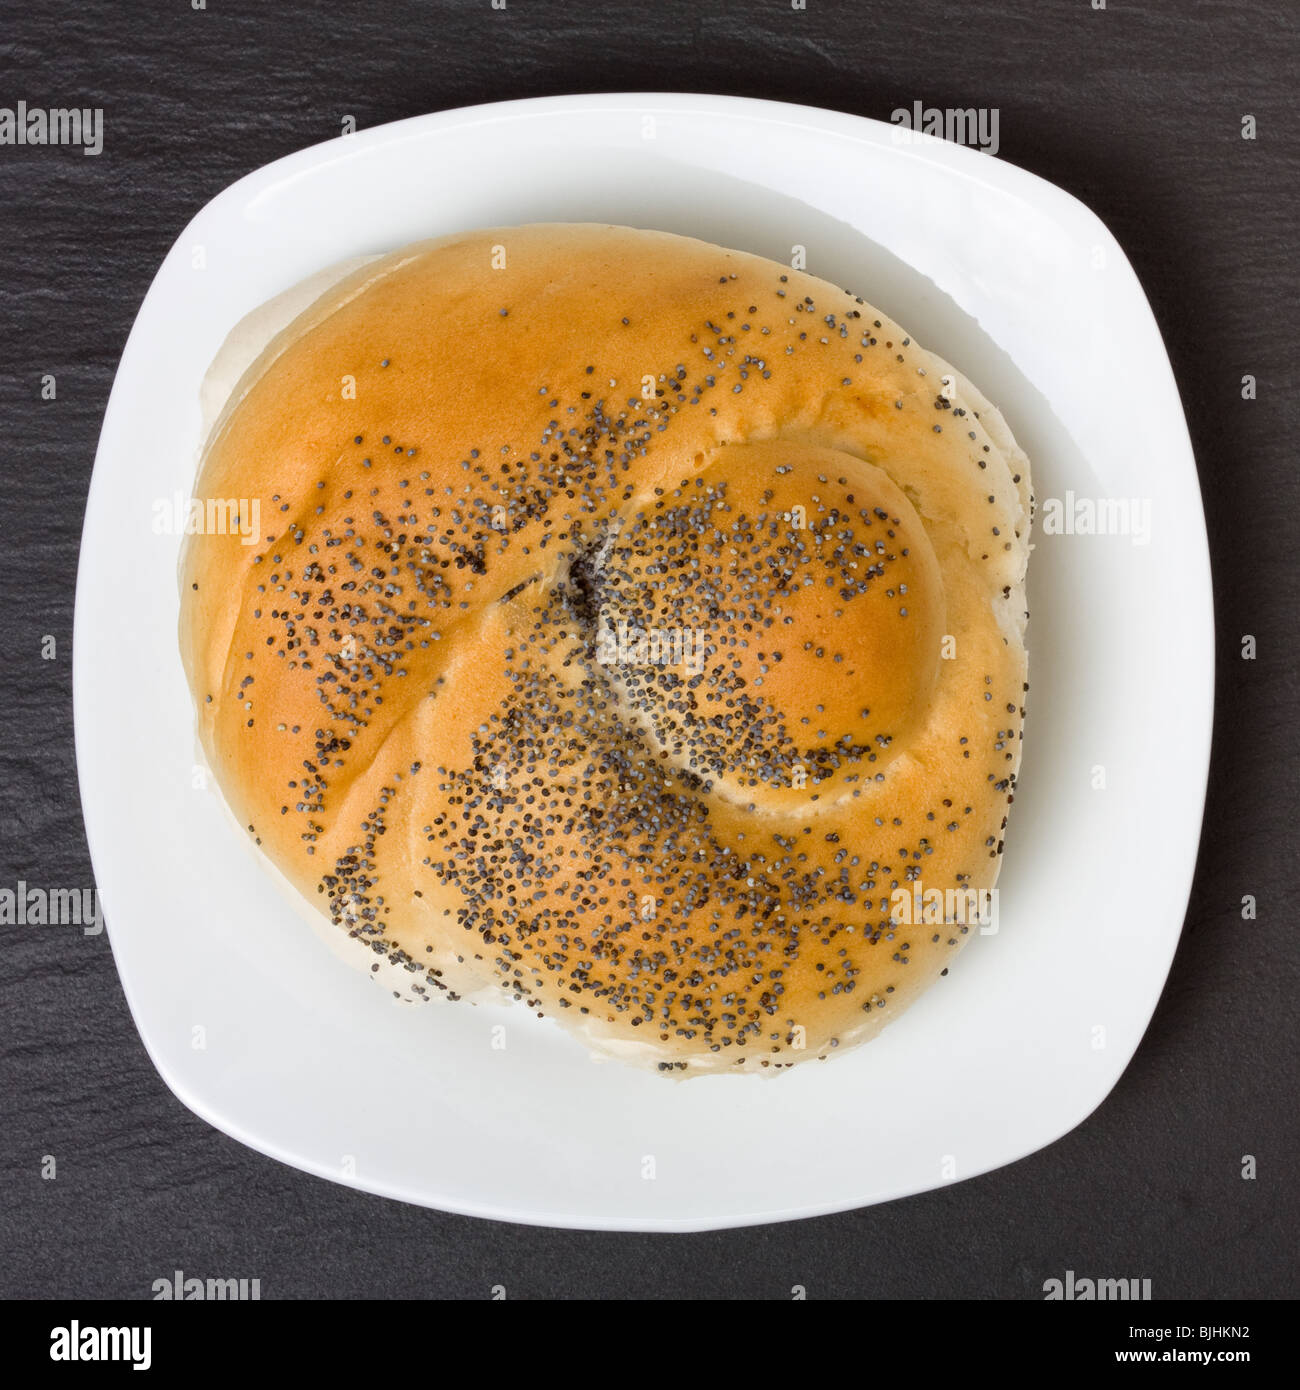 Seeded bread roll on white plate from high viewpoint against dark slate background. Stock Photo